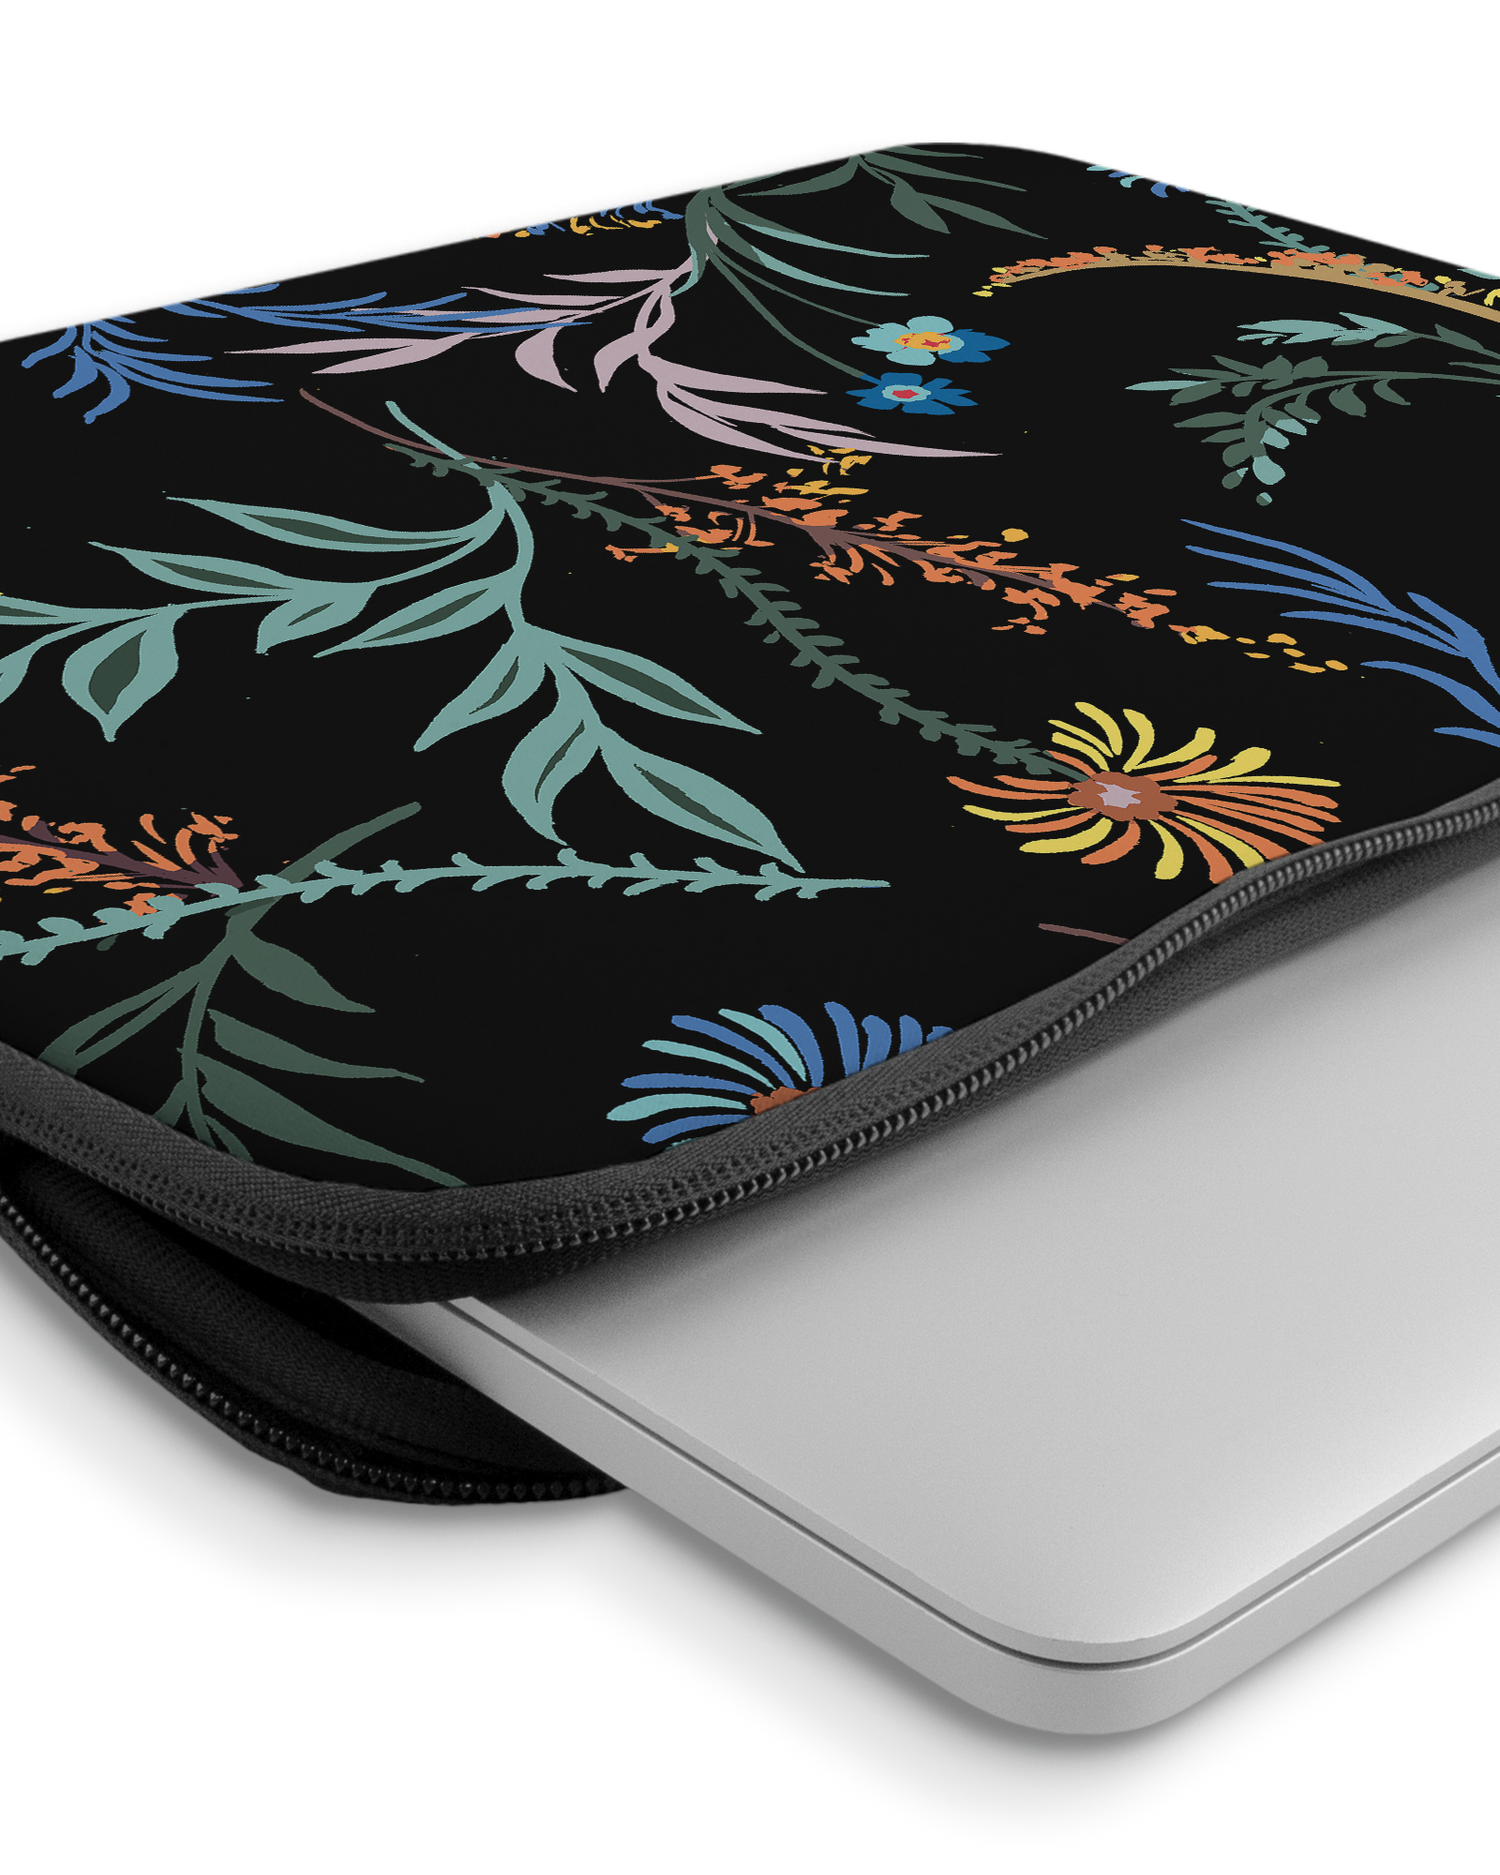 Woodland Spring Floral Laptop Case 14-15 inch with device inside